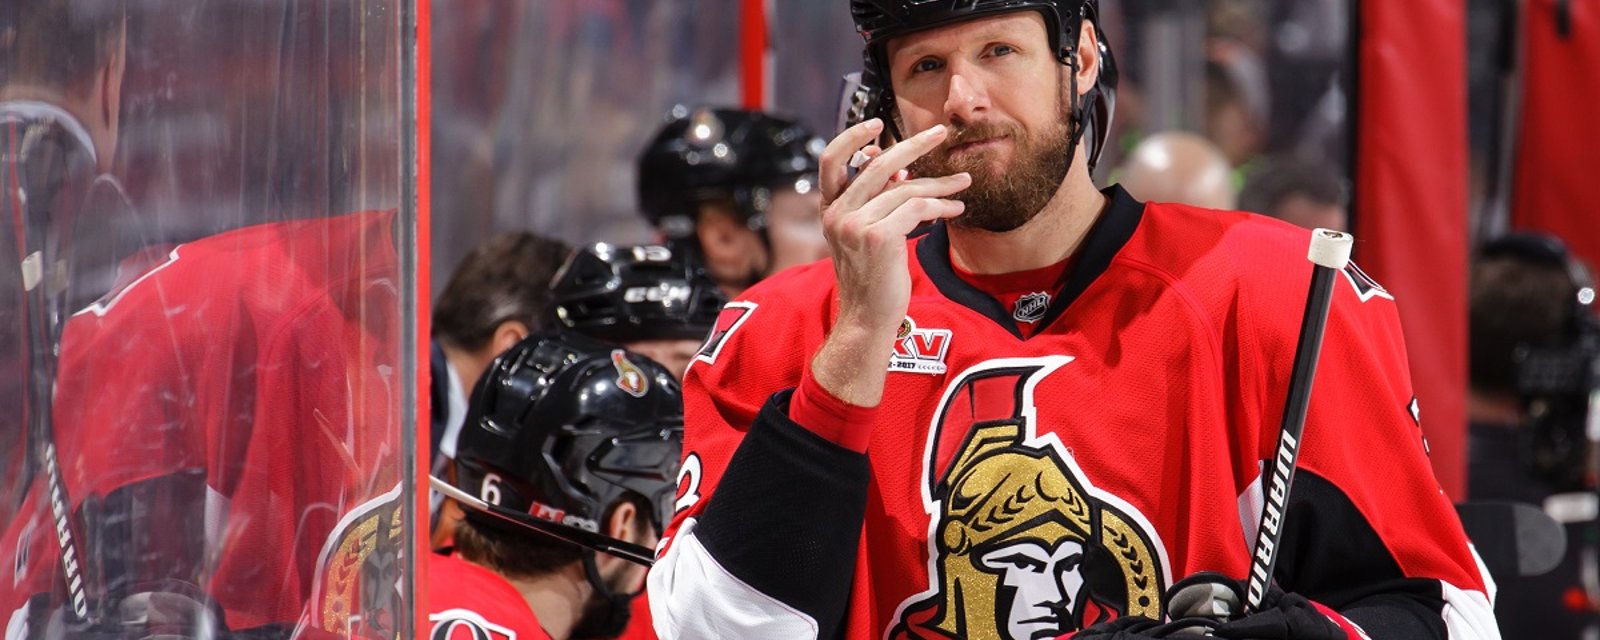 Marc Methot shuts down fan who claims taxes give no competitive advantage in the NHL.